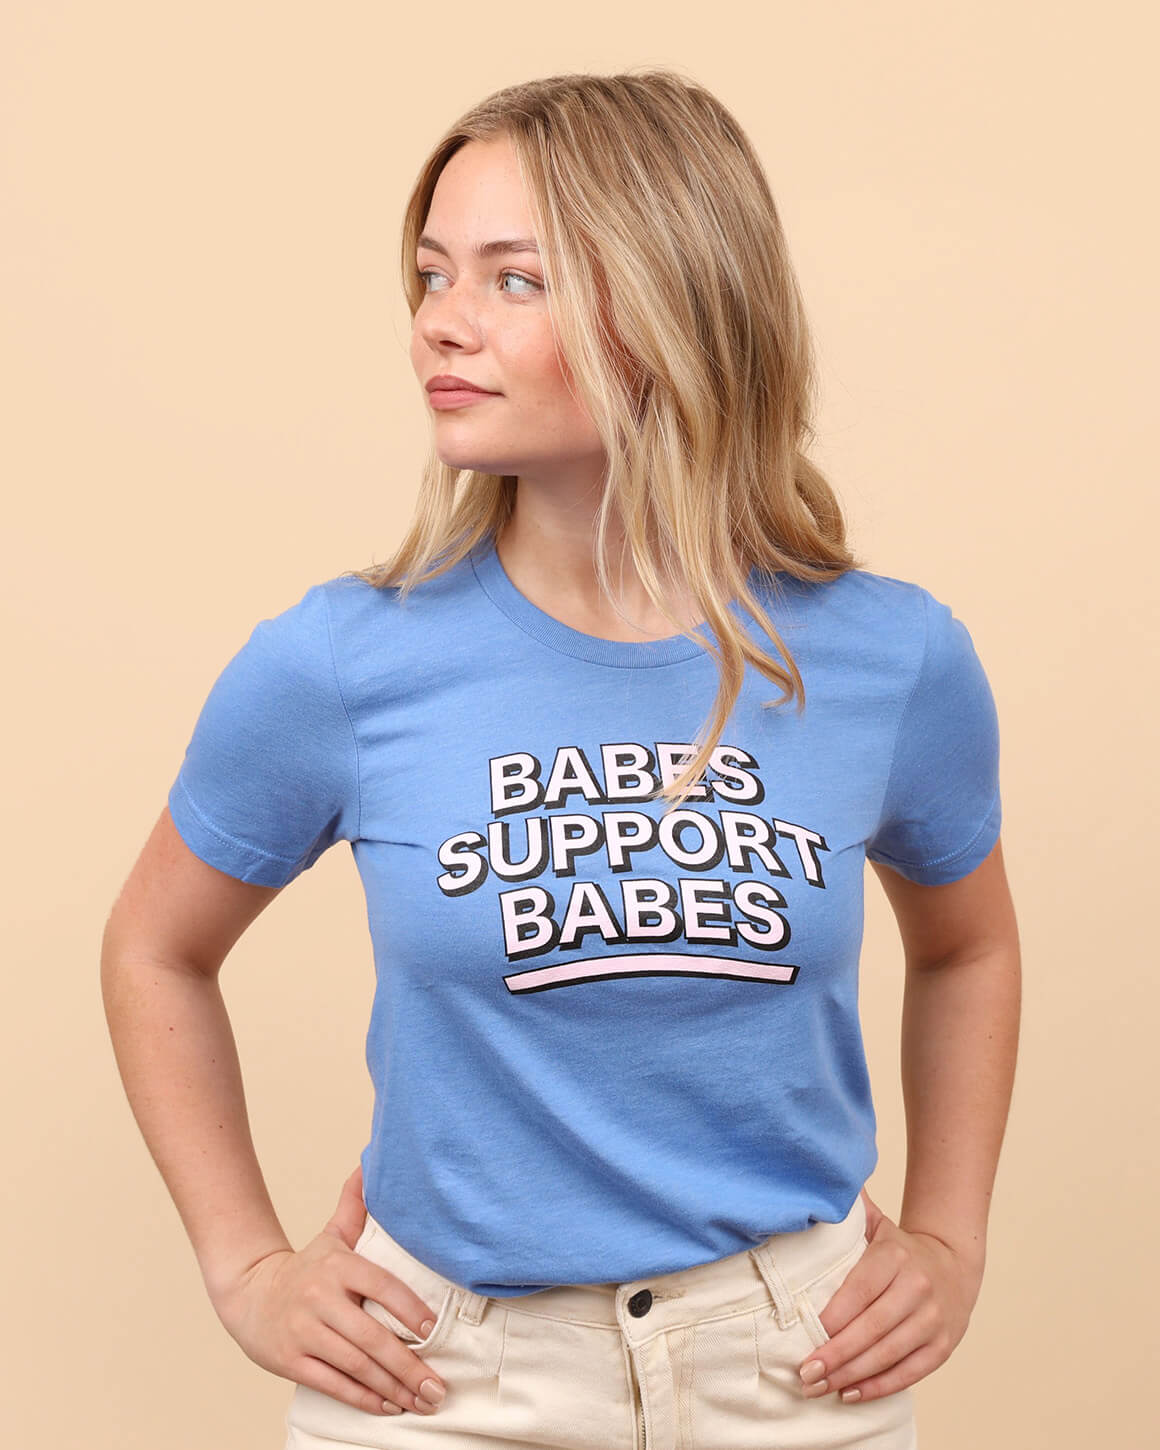 Woman in light blue babes support babes t-shirt